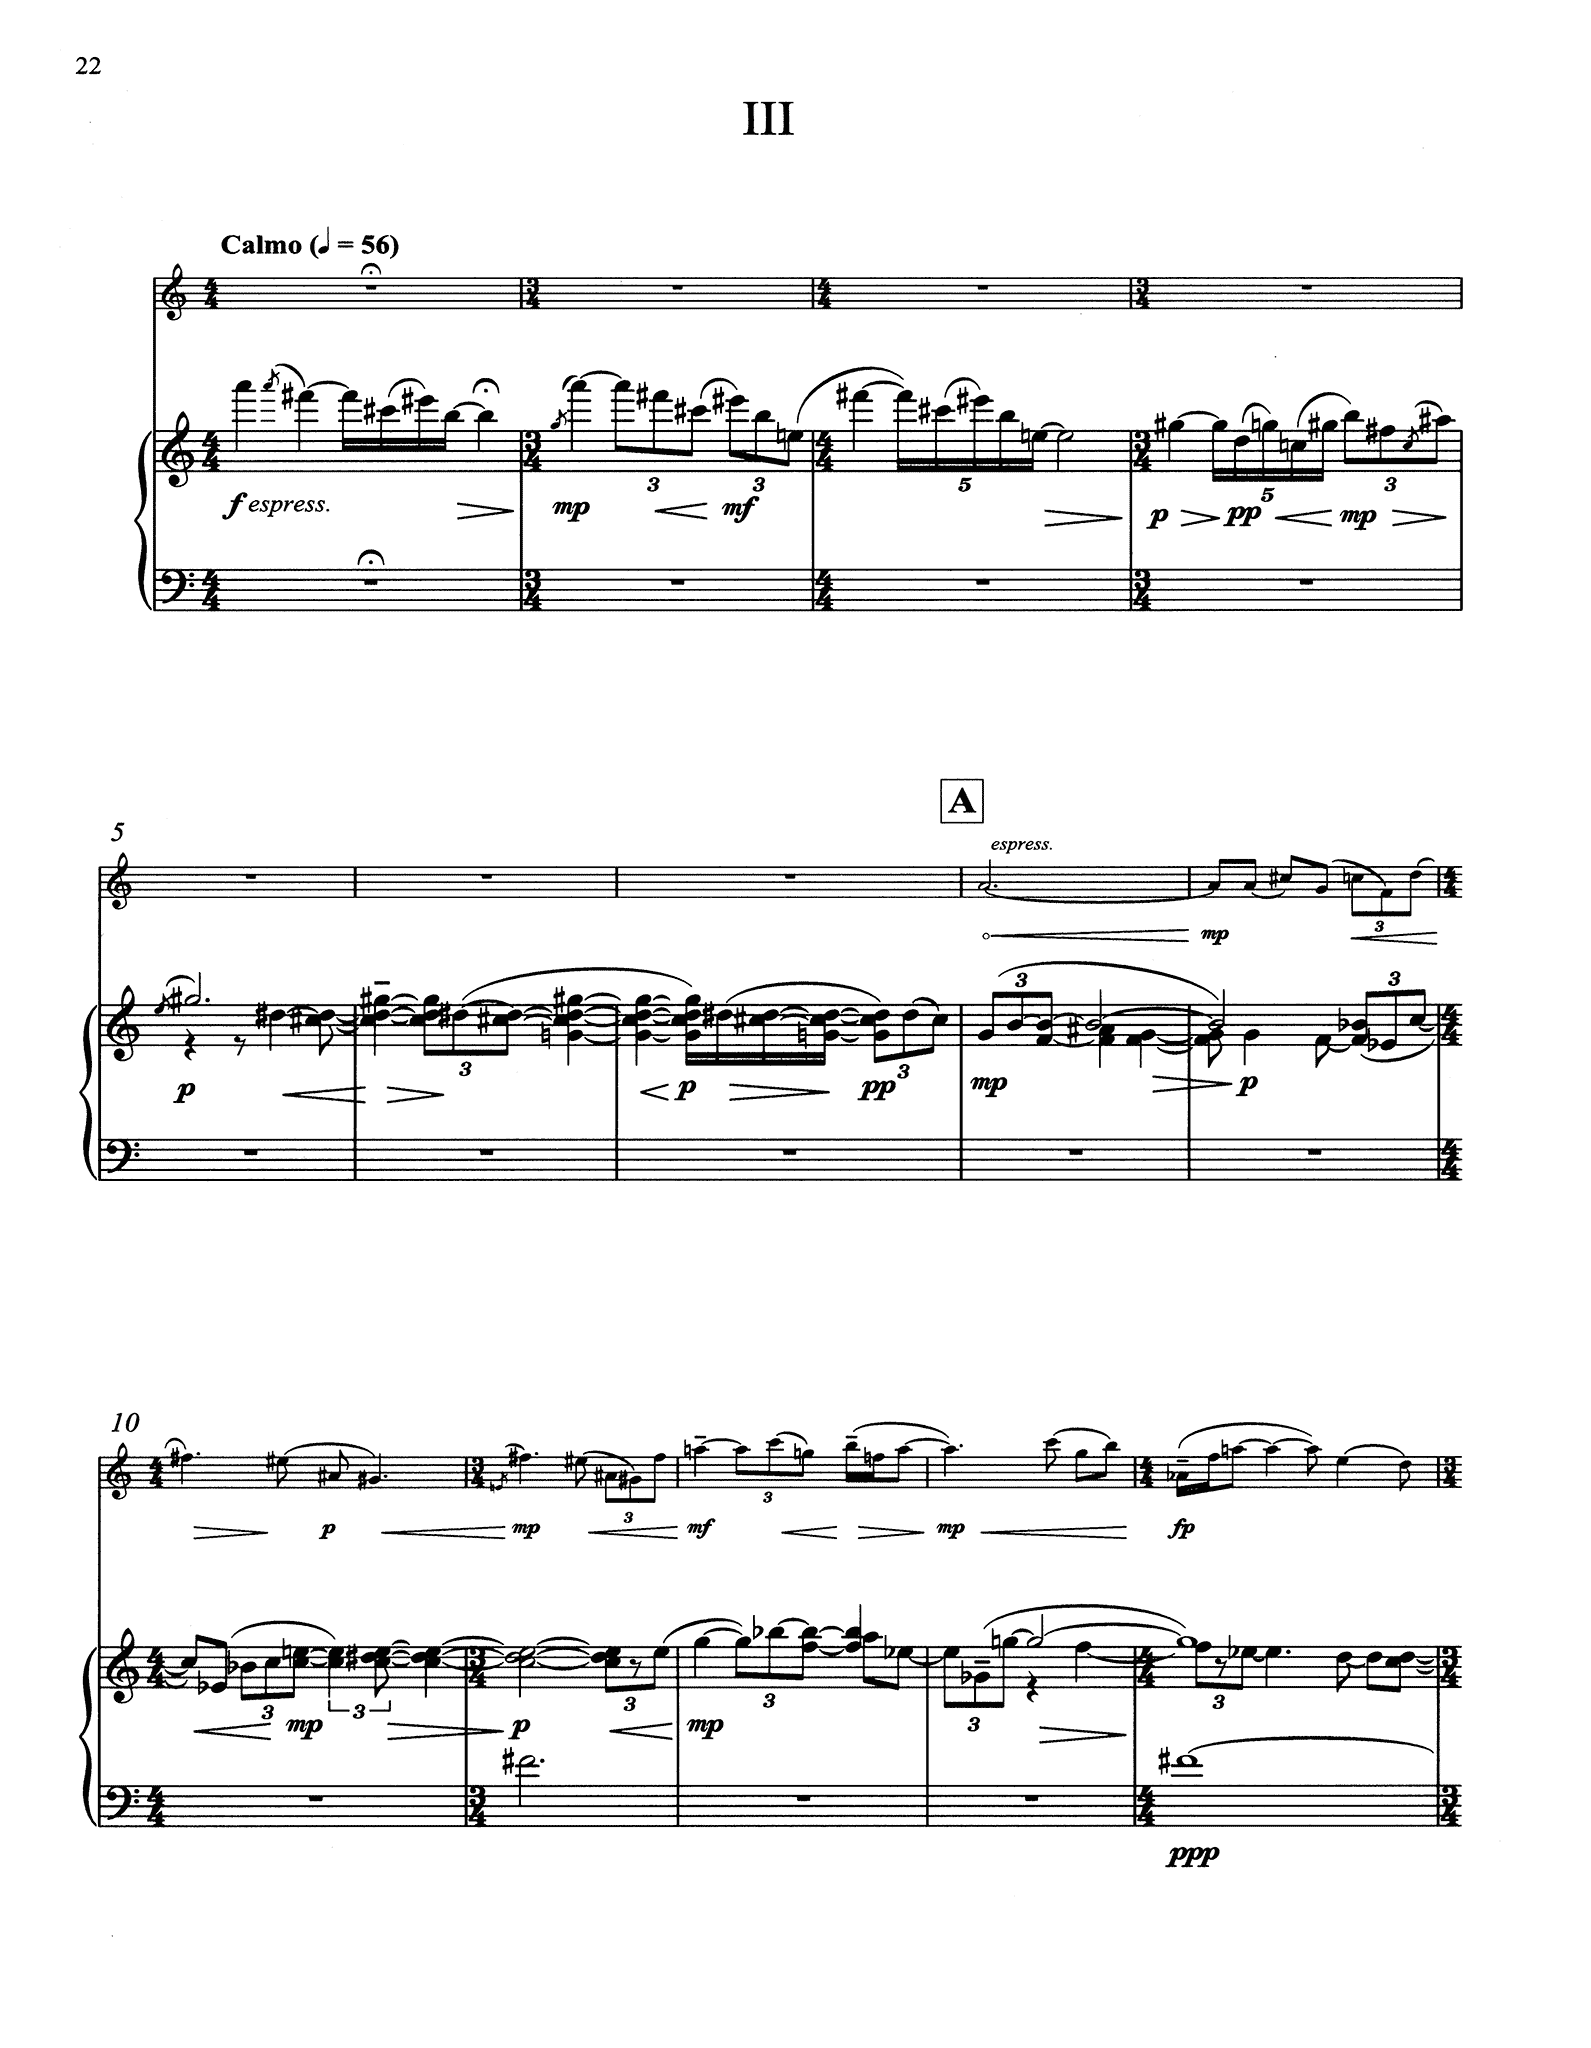 Helen Grime Clarinet Concerto piano reduction - Movement 3